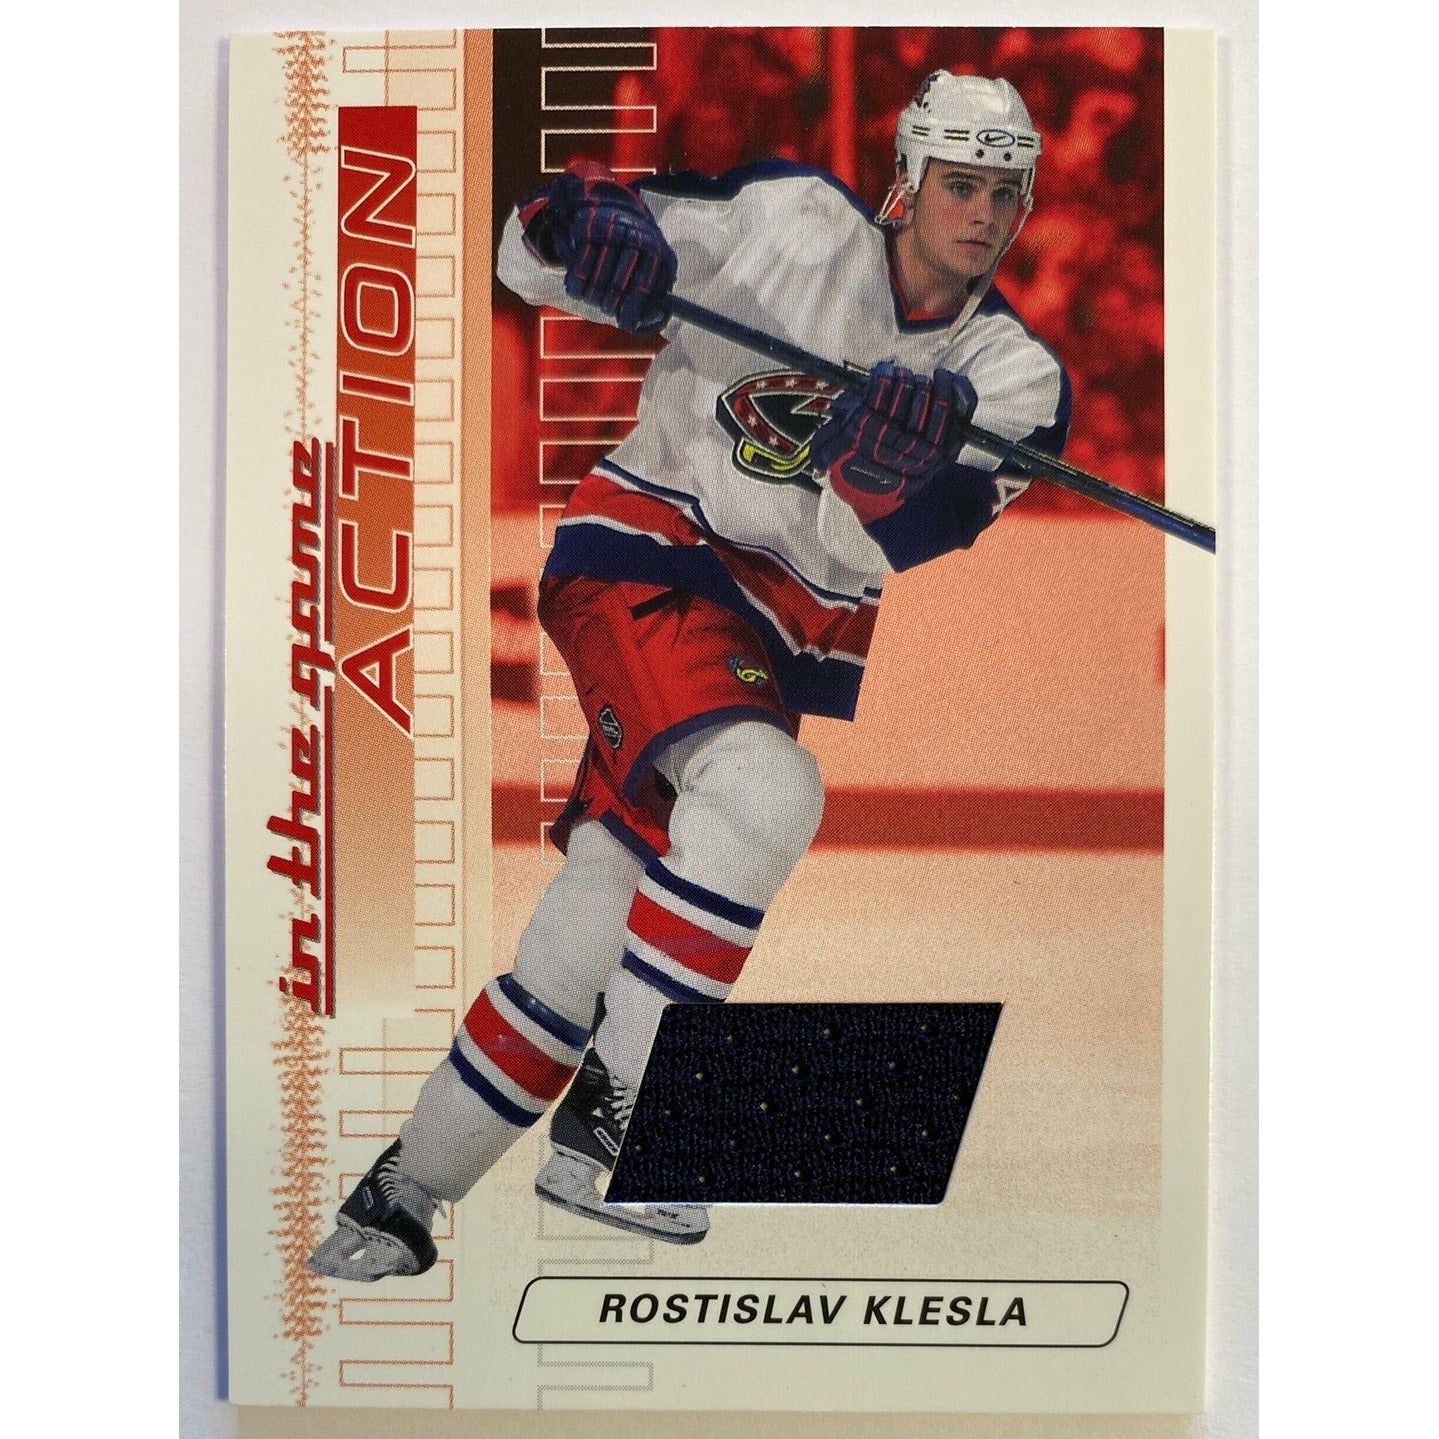 2002-03 In The Game Rostislav Klesla Game Used Jersey Patch